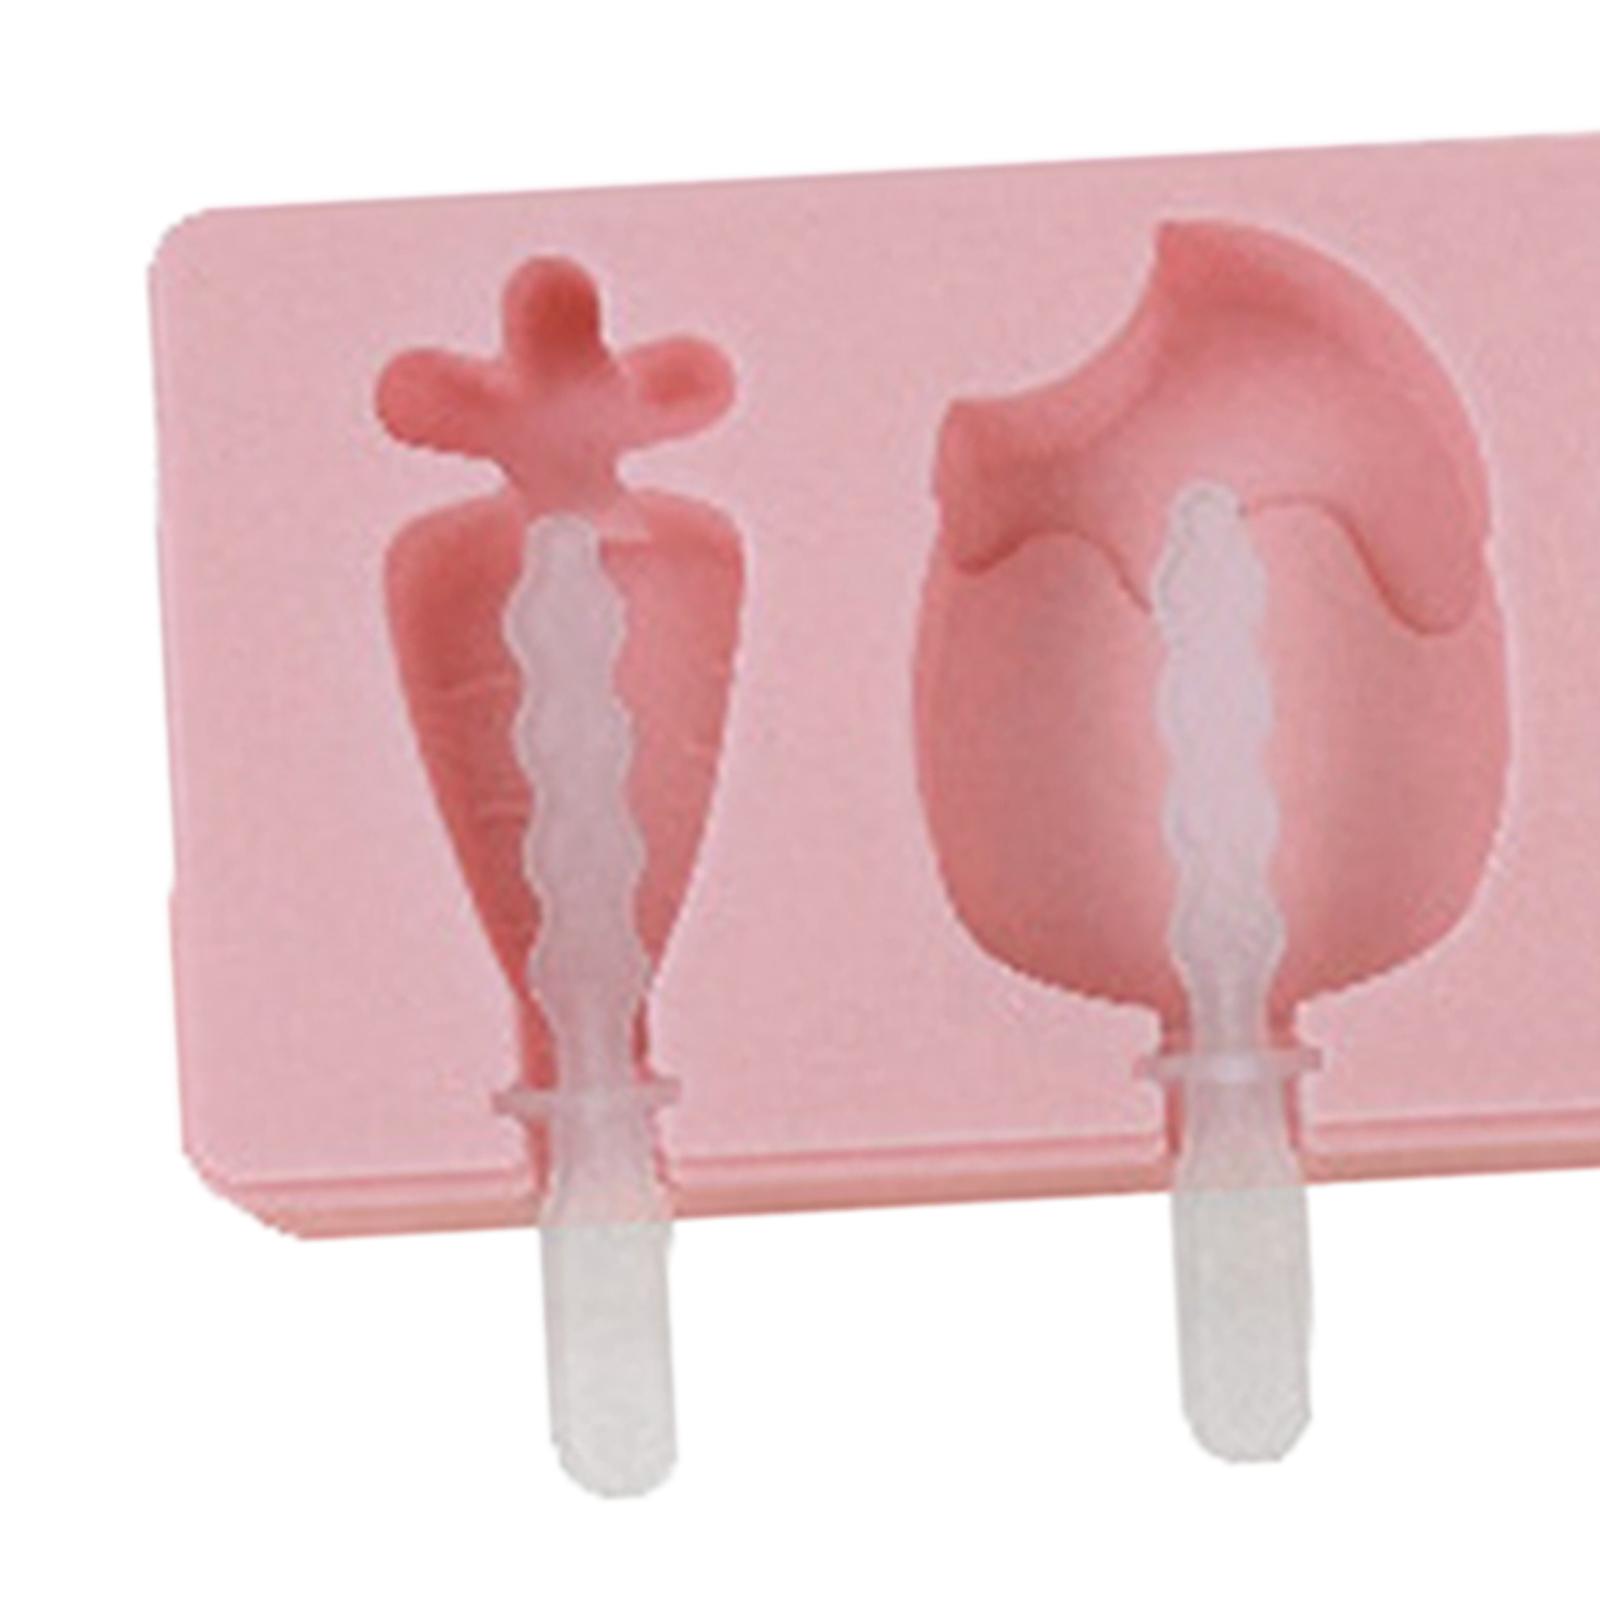 Popsicle maker for Release Cartoon Removable Cute Image Ice Making style G